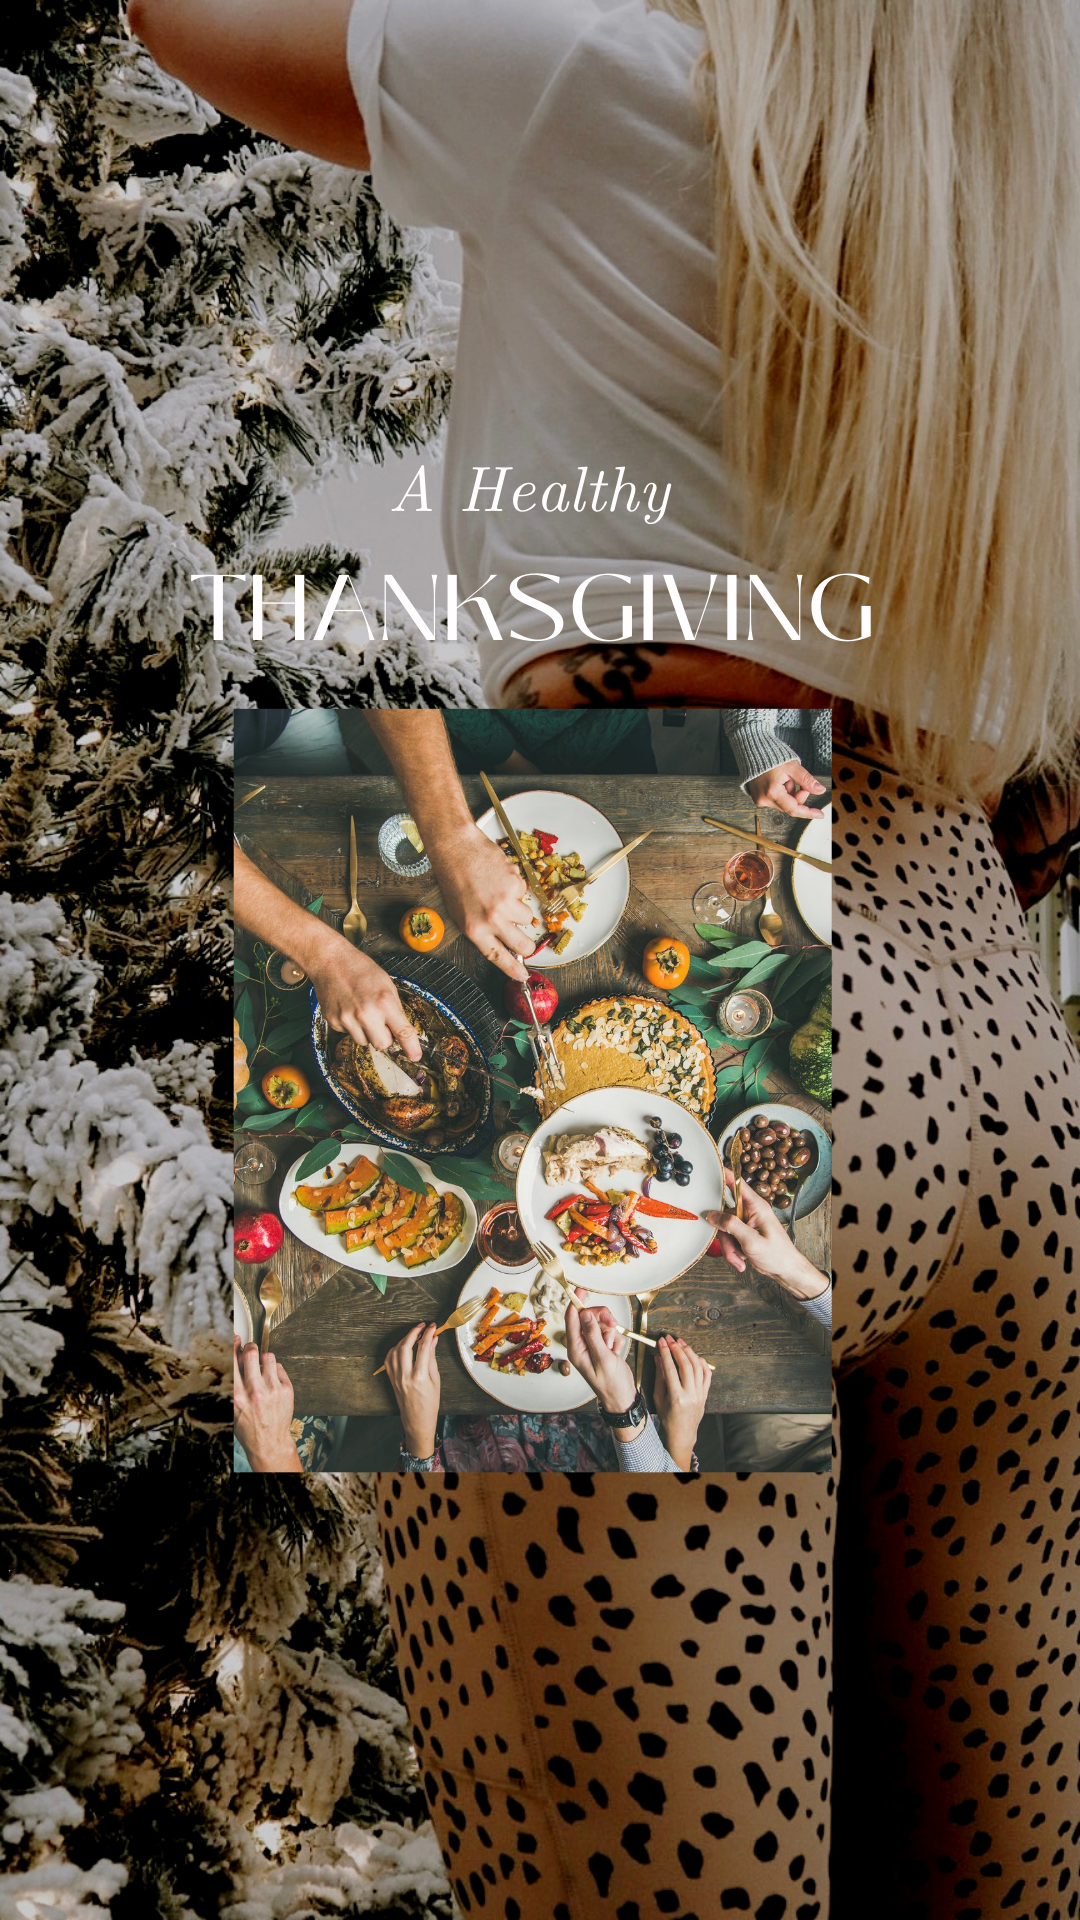 A healthy Thanksgiving is possible!